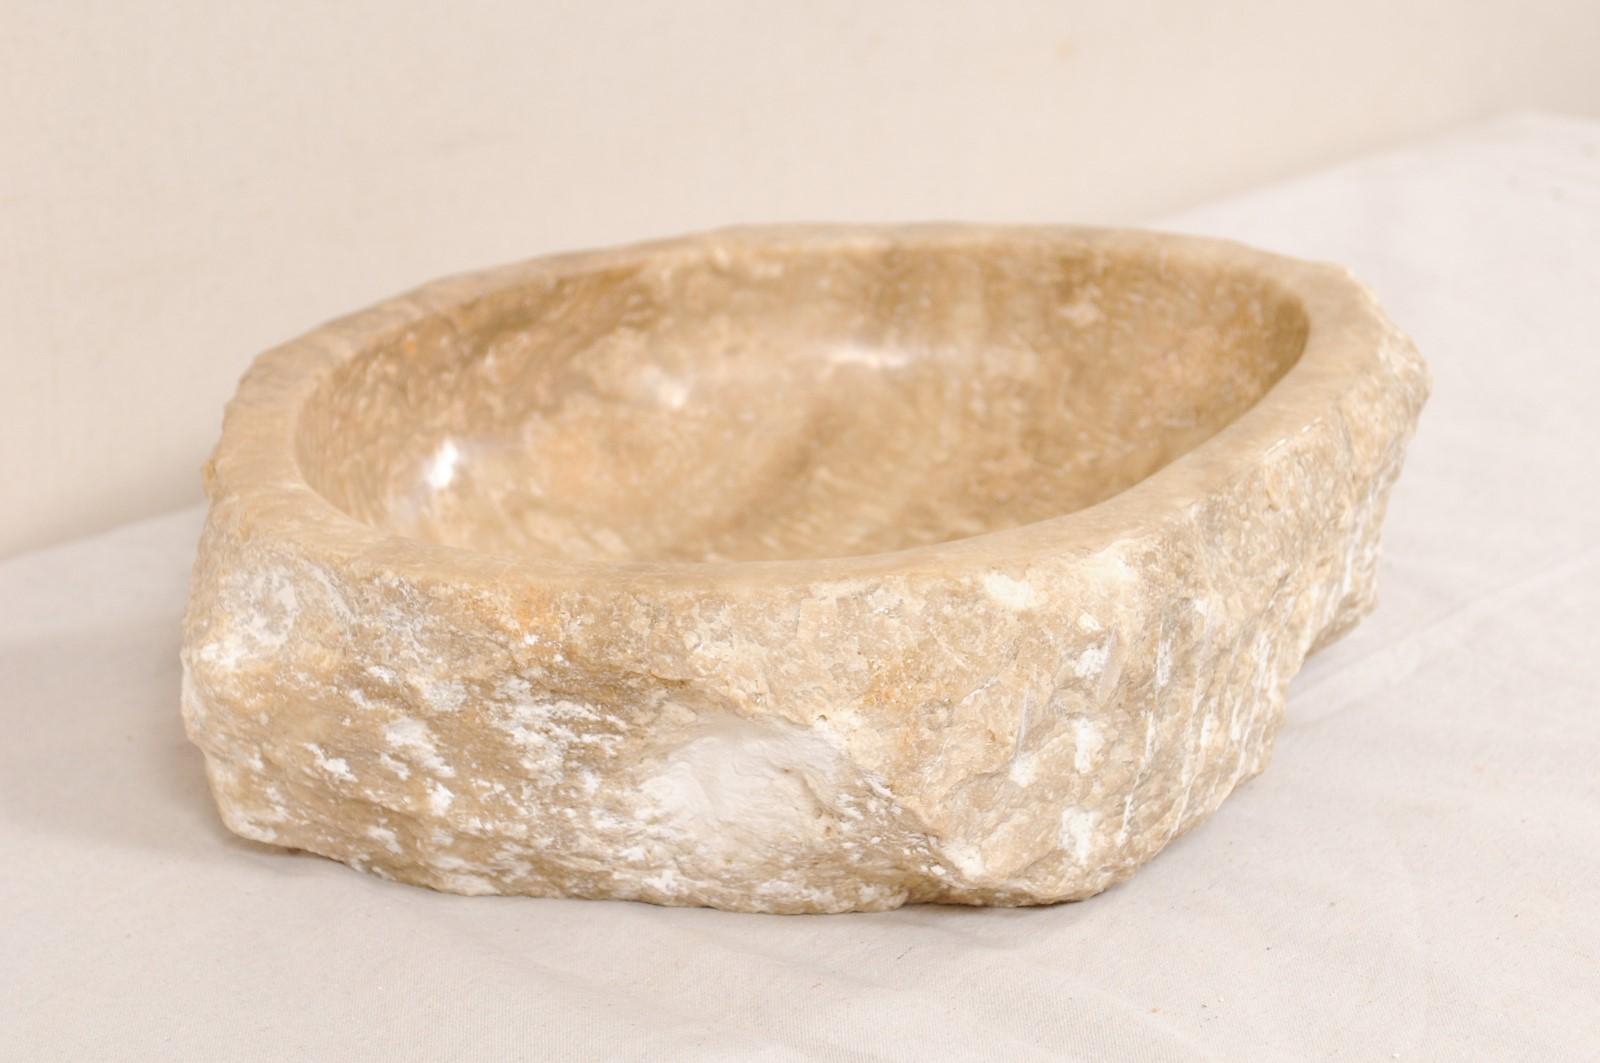 Beautiful Polished Onyx Rock Sink Basin in Neutral Cream and Brown Hues 3